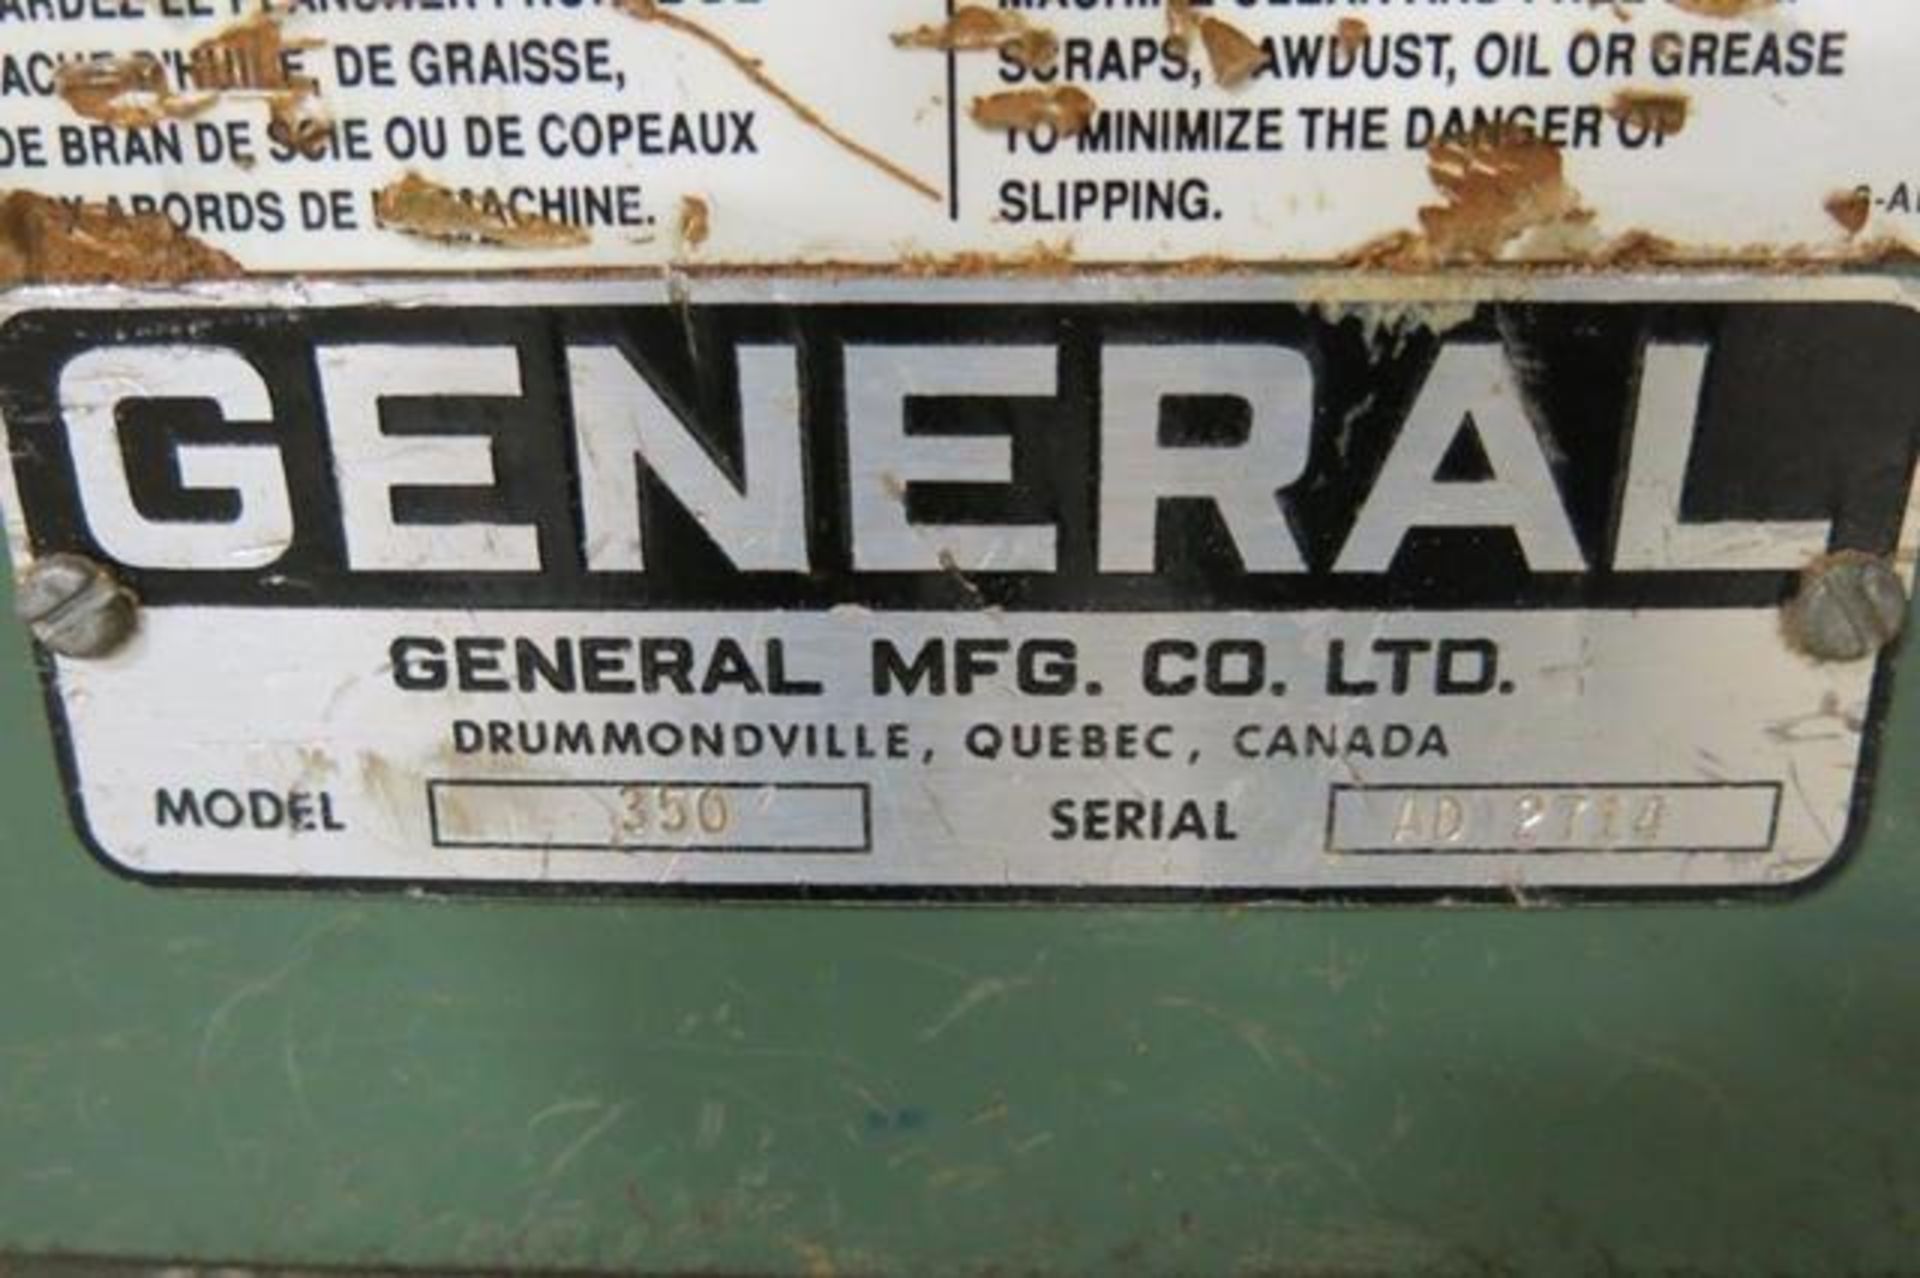 GENERAL, 350, TABLE SAW, S/N AD2714 WITH DUST COLLECTOR (RIGGING - $125) - Image 4 of 5